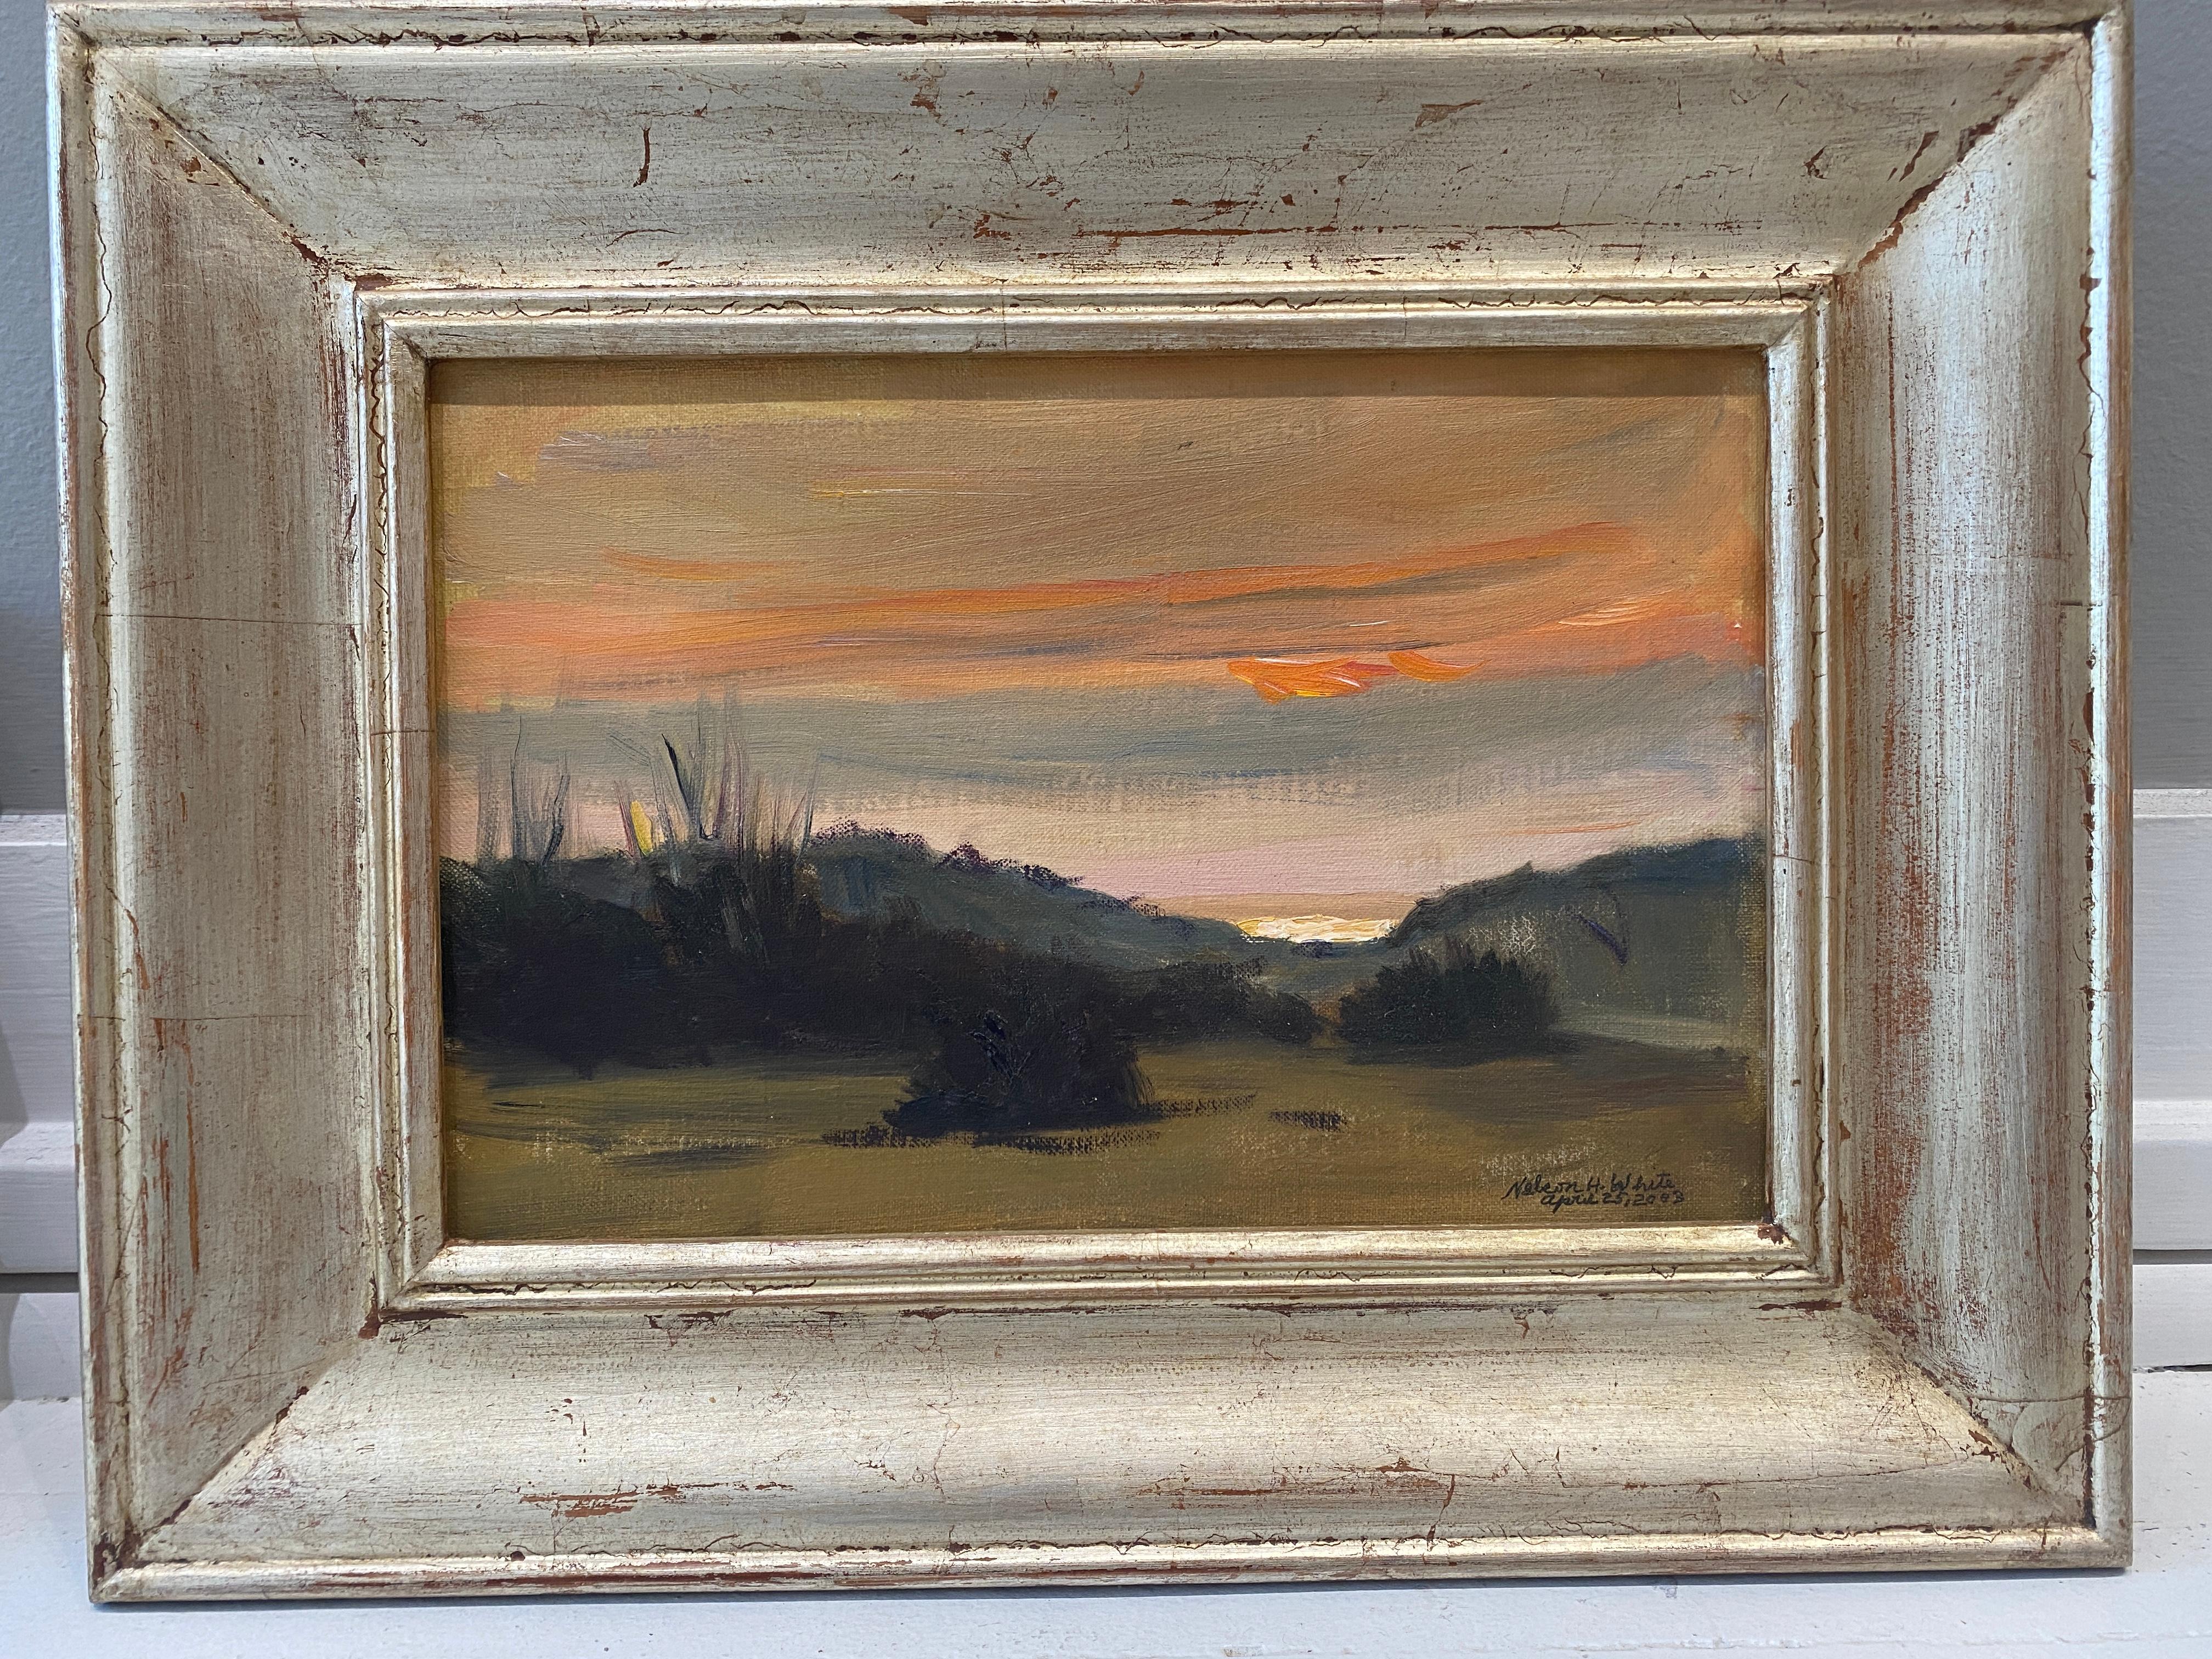 A soft sunset over a distant horizon that peeks through the dunes of the beach. Painted en plein air.

Frame Dimensions  13.5 x 17.5in

Artist Bio:
Nelson H. White was born in New London, Connecticut in 1932. White has been surrounded by art and